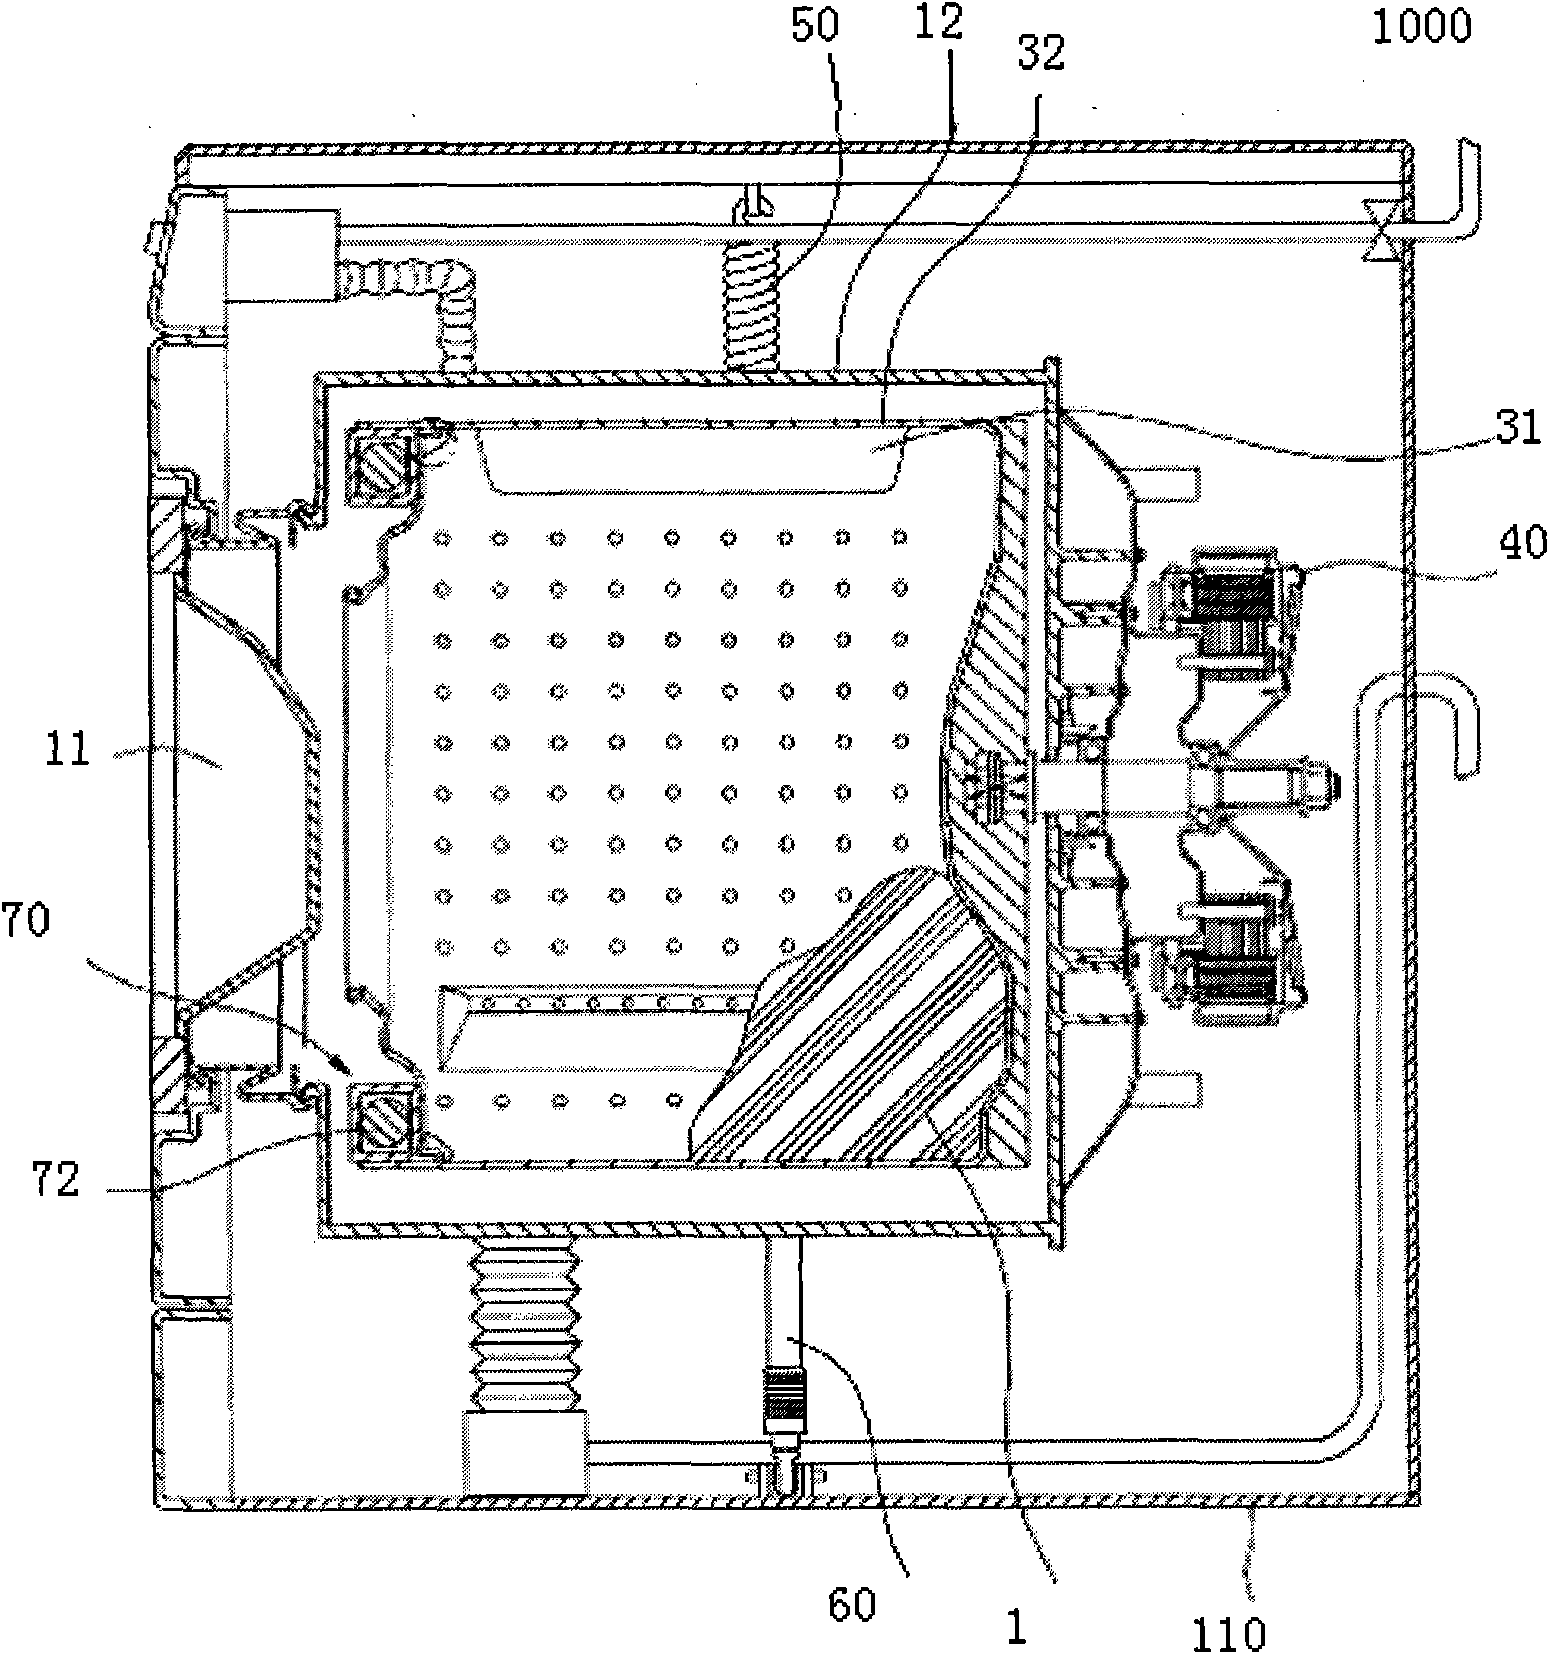 Control method for laundry device